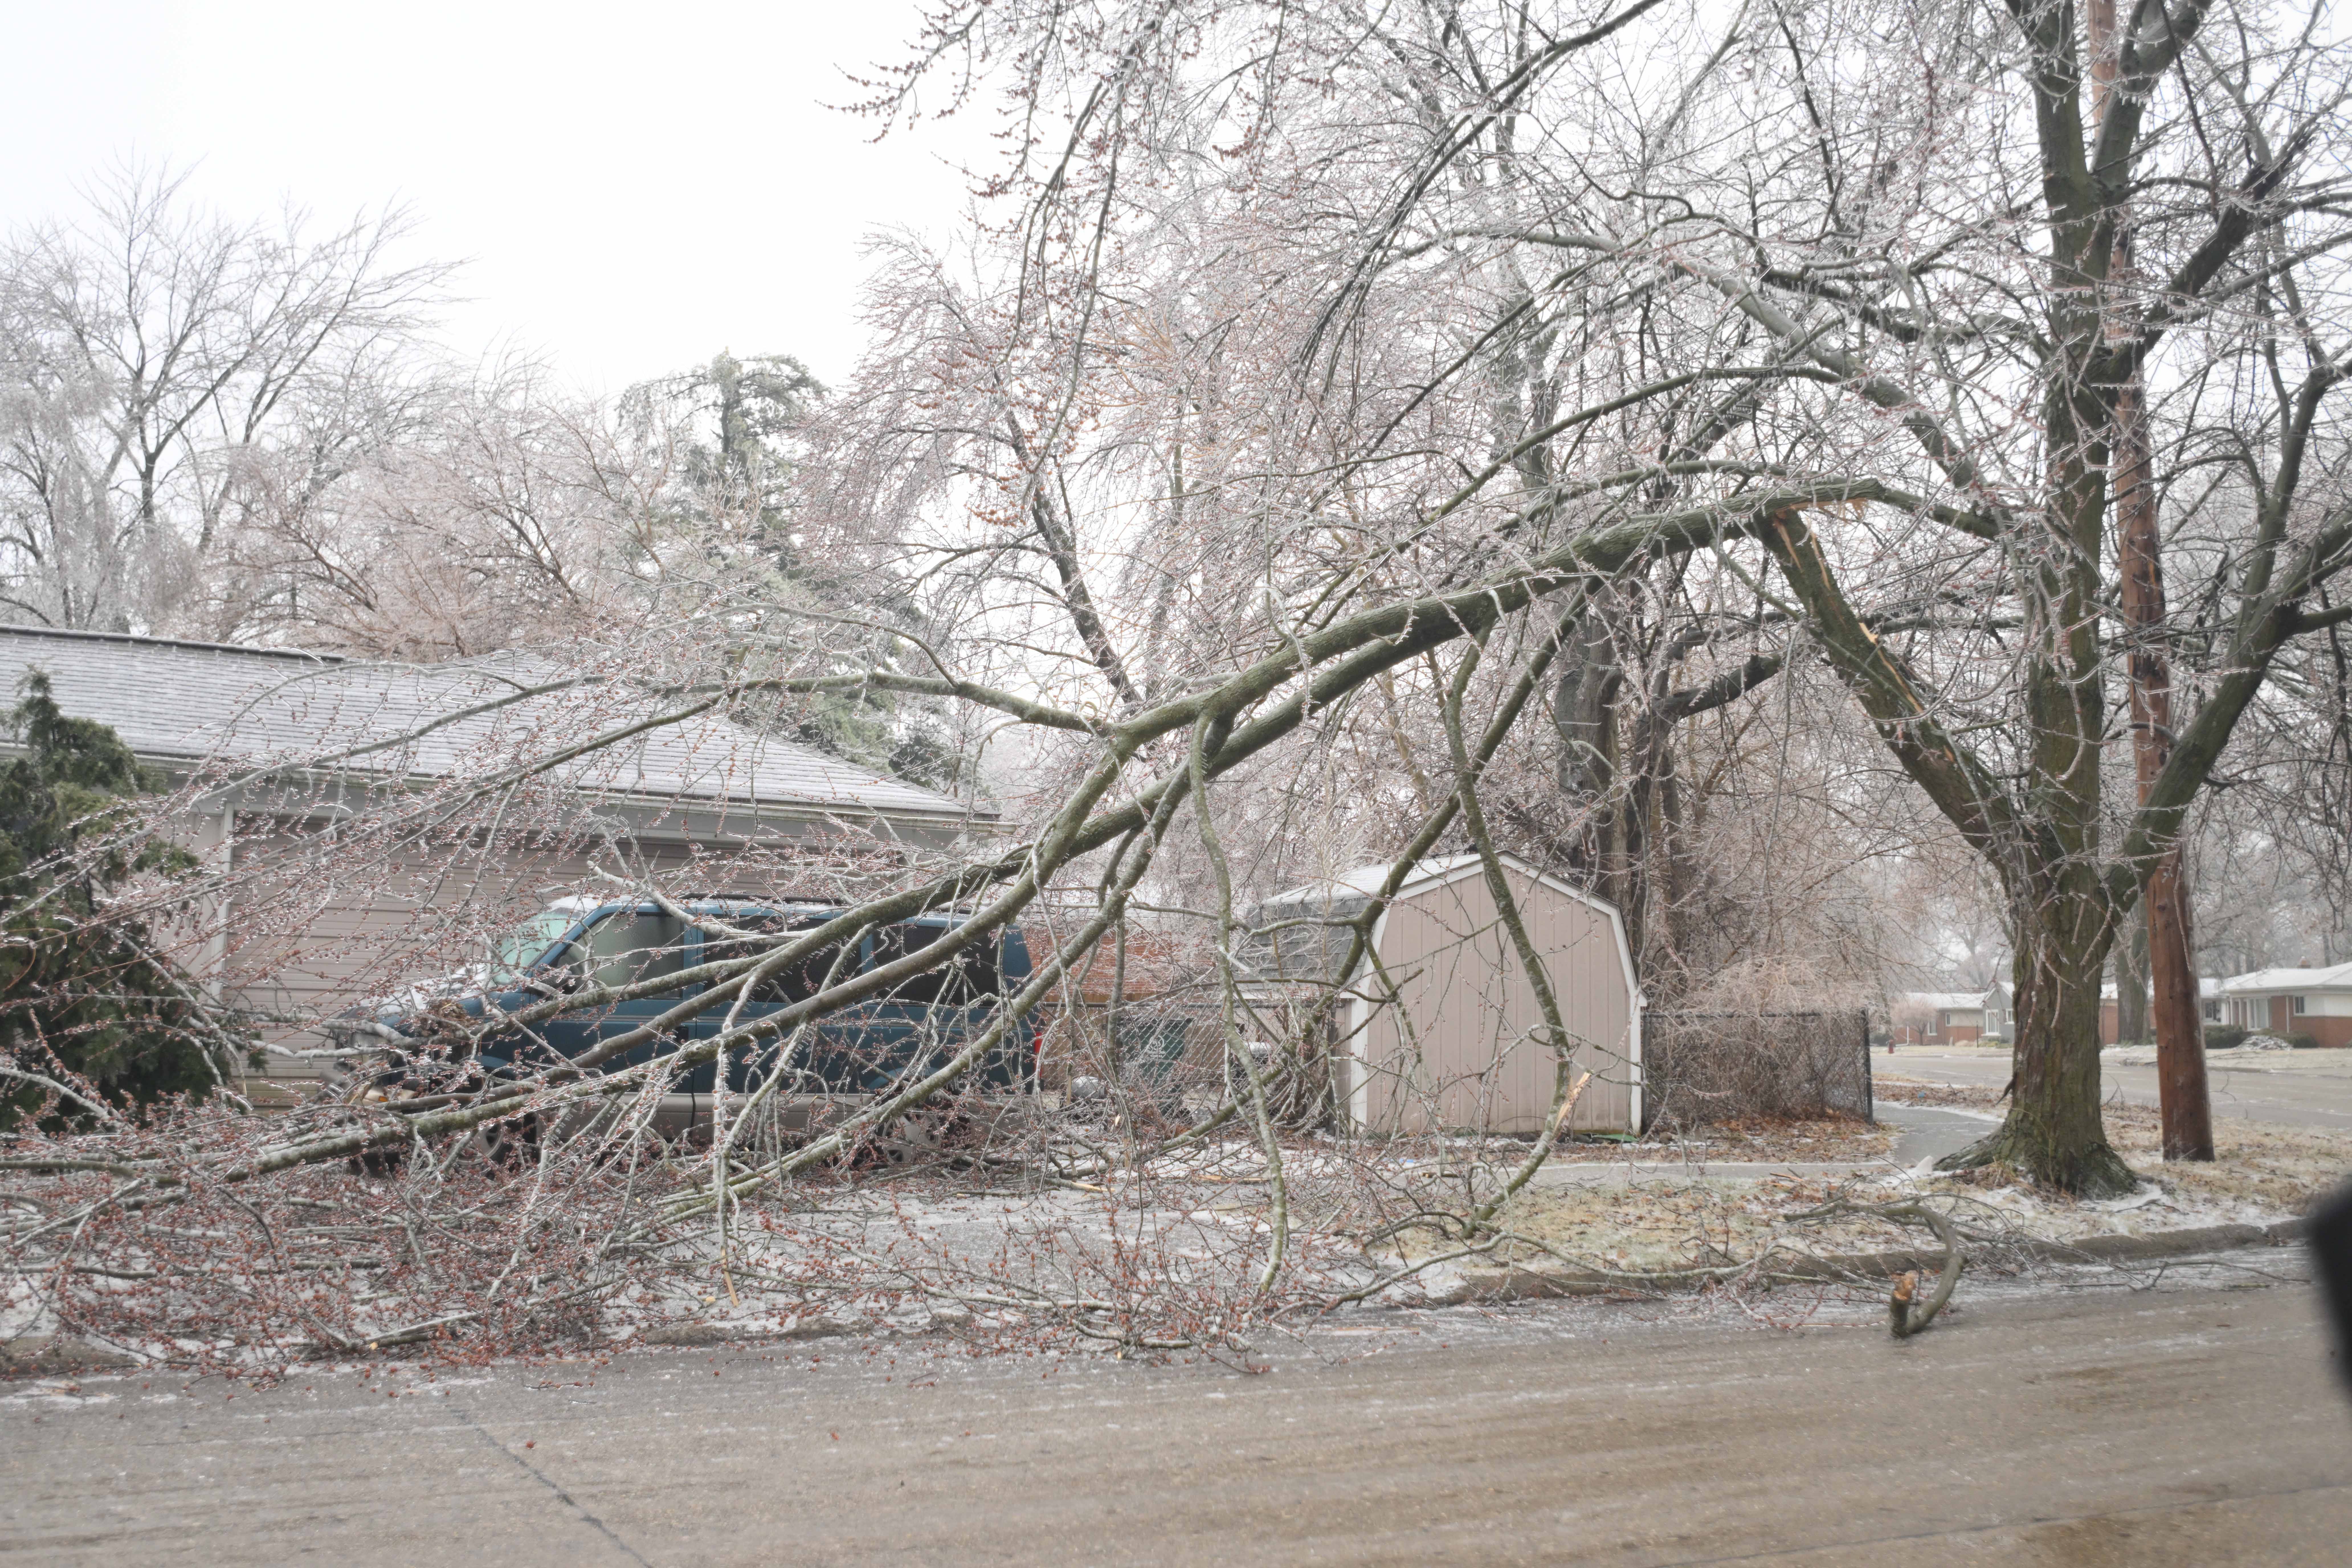 Fallen limbs incased in ice cover a van af at a house on Oliver in Royal Oak, Michigan on February 23, 2023.